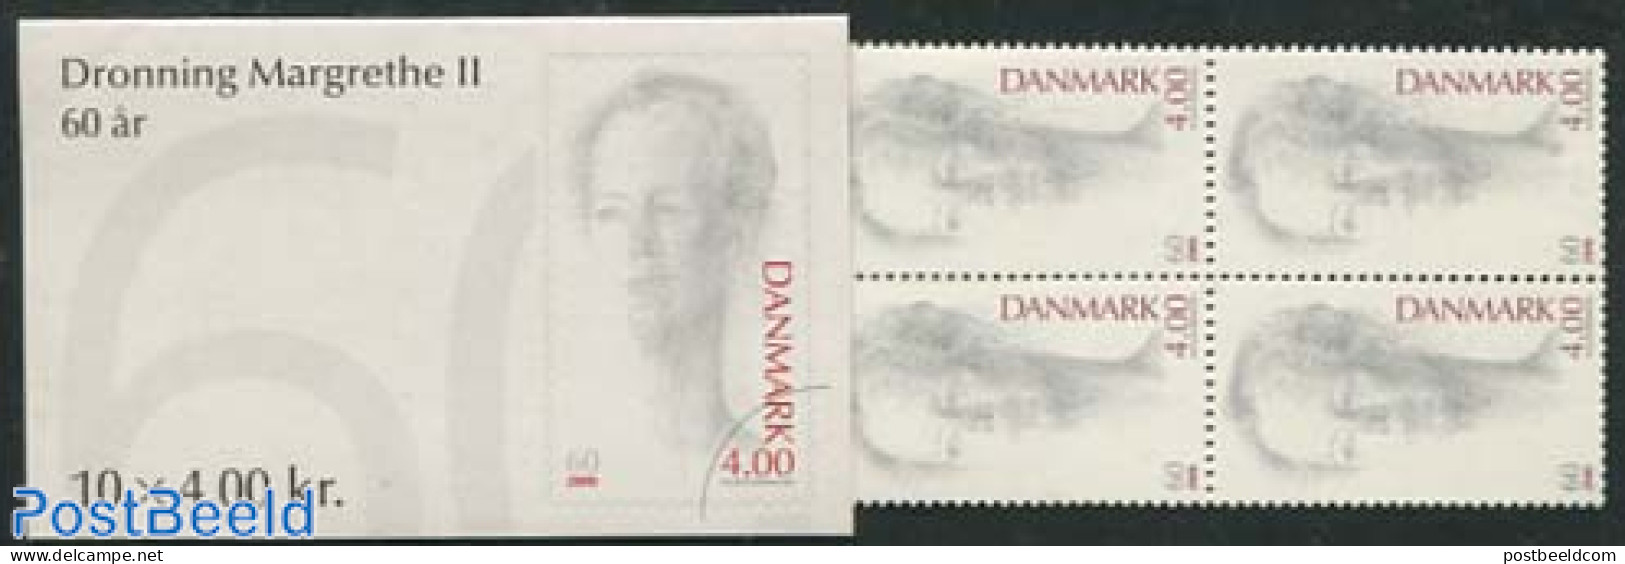 Denmark 2000 Queen Margrethe II Birthday Booklet, Mint NH, History - Kings & Queens (Royalty) - Stamp Booklets - Ungebraucht